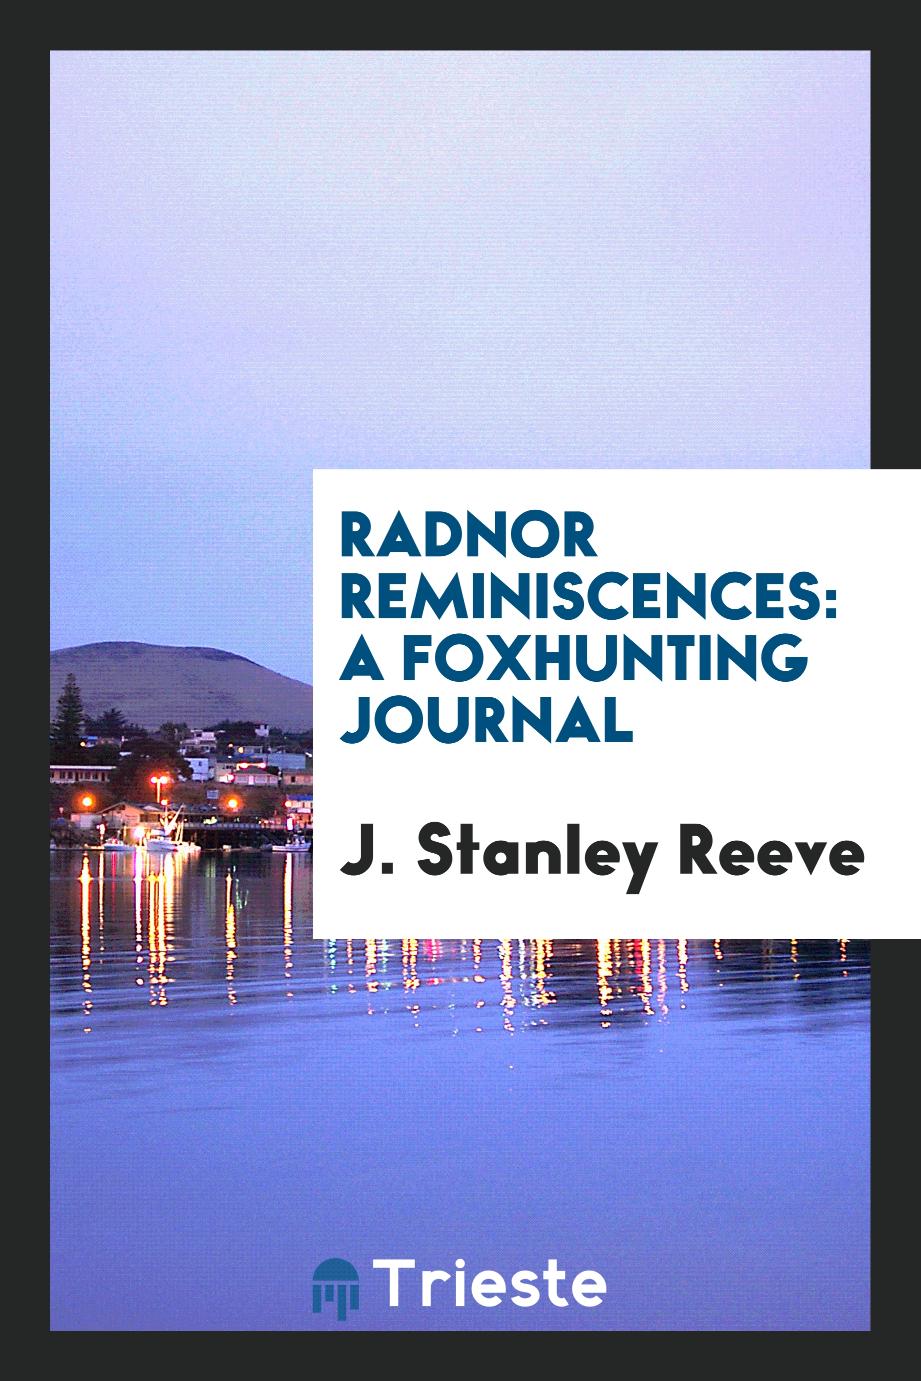 Radnor reminiscences: a foxhunting journal